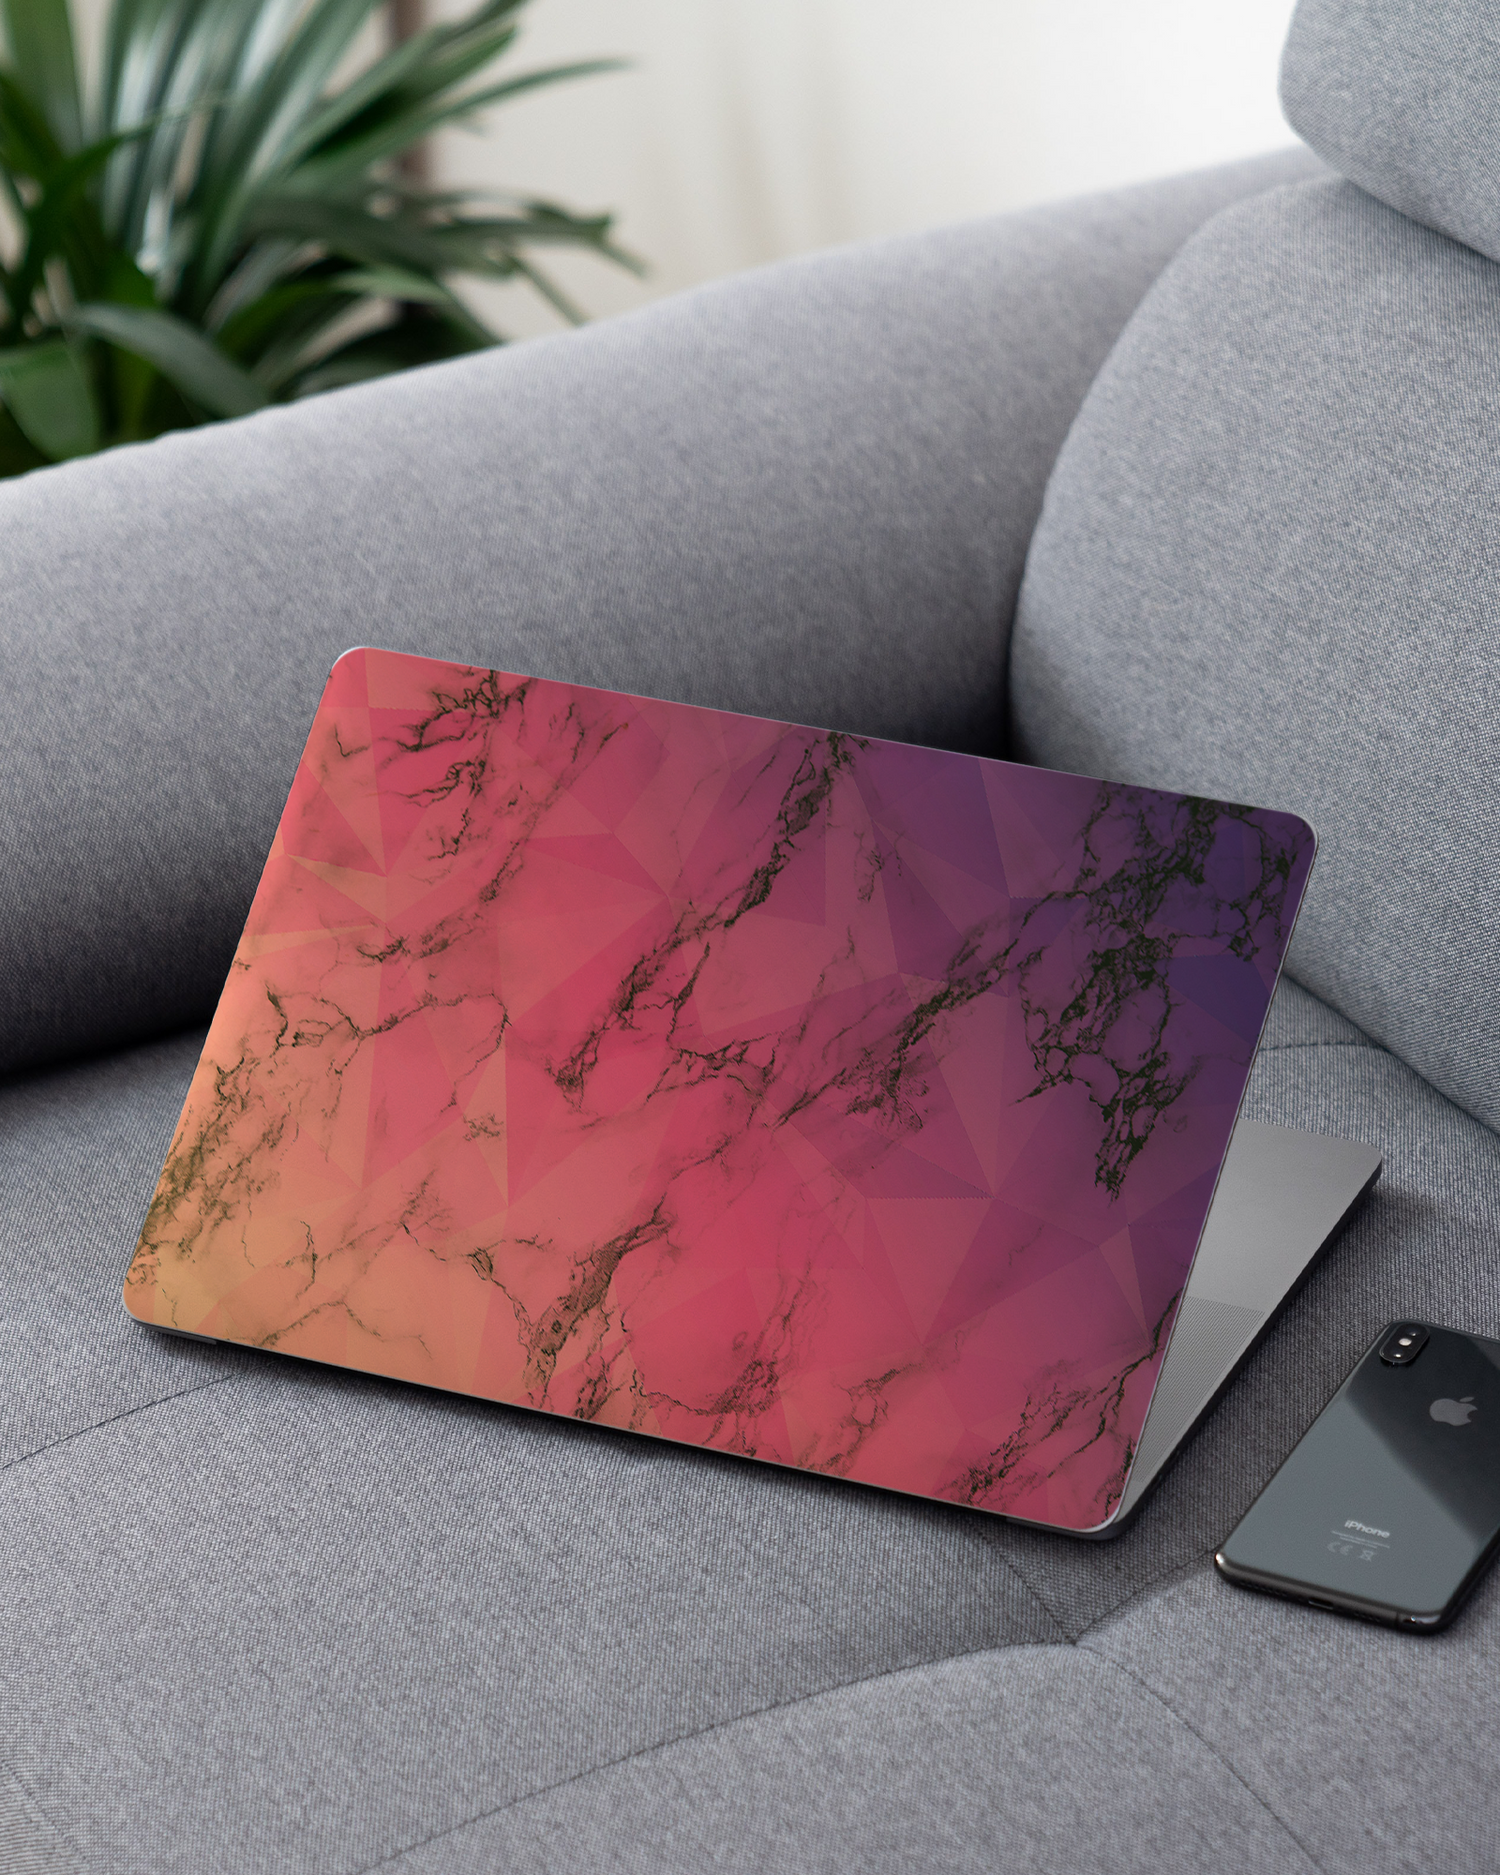 Marbled Triangles Laptop Skin for 13 inch Apple MacBooks on a couch